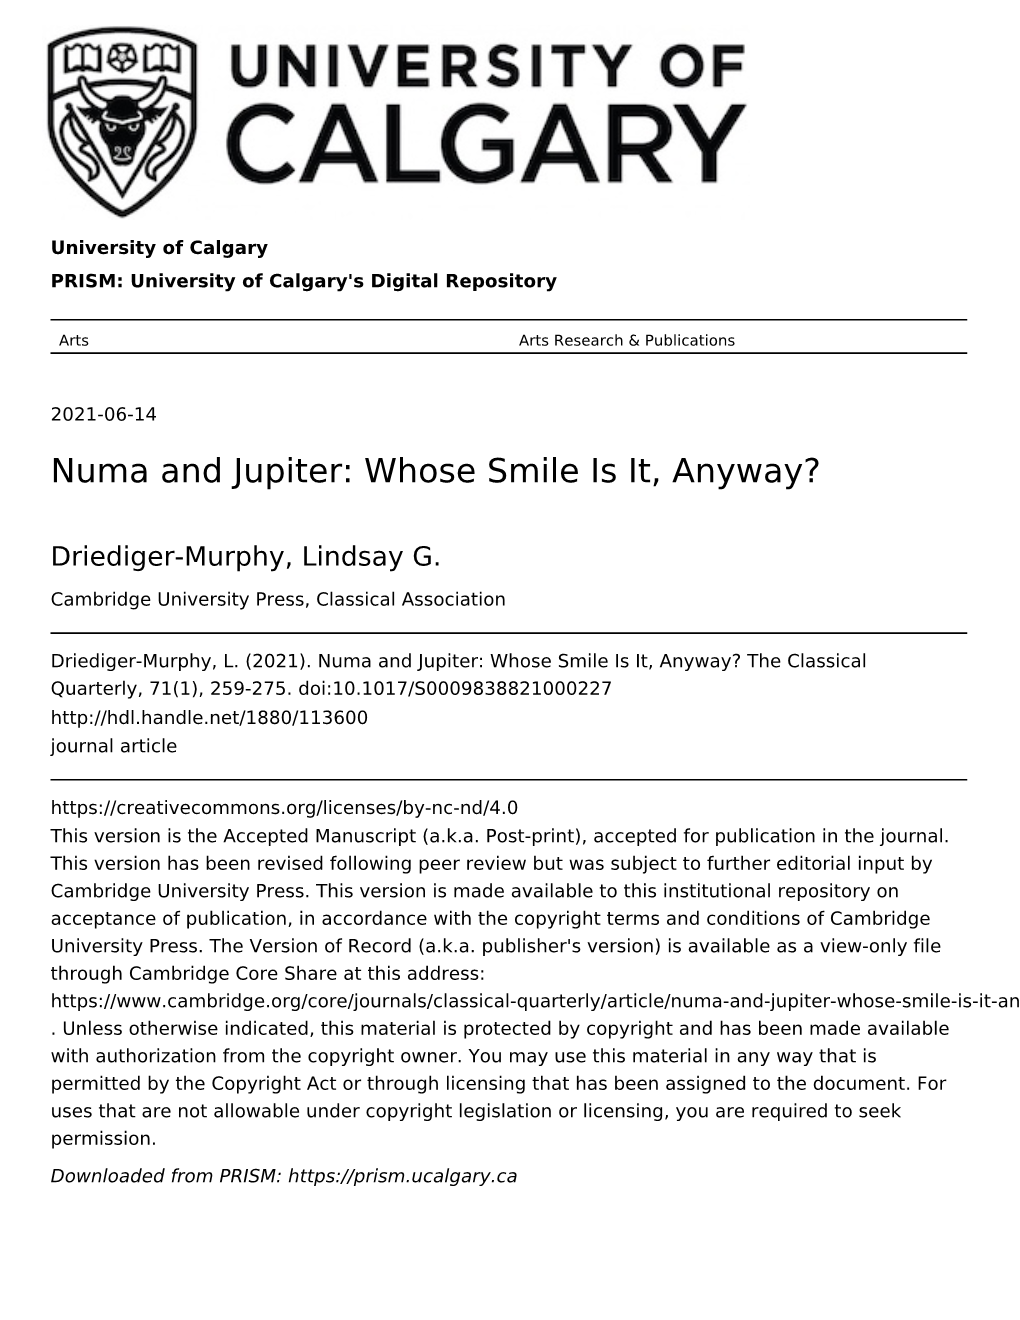 Numa and Jupiter: Whose Smile Is It, Anyway?